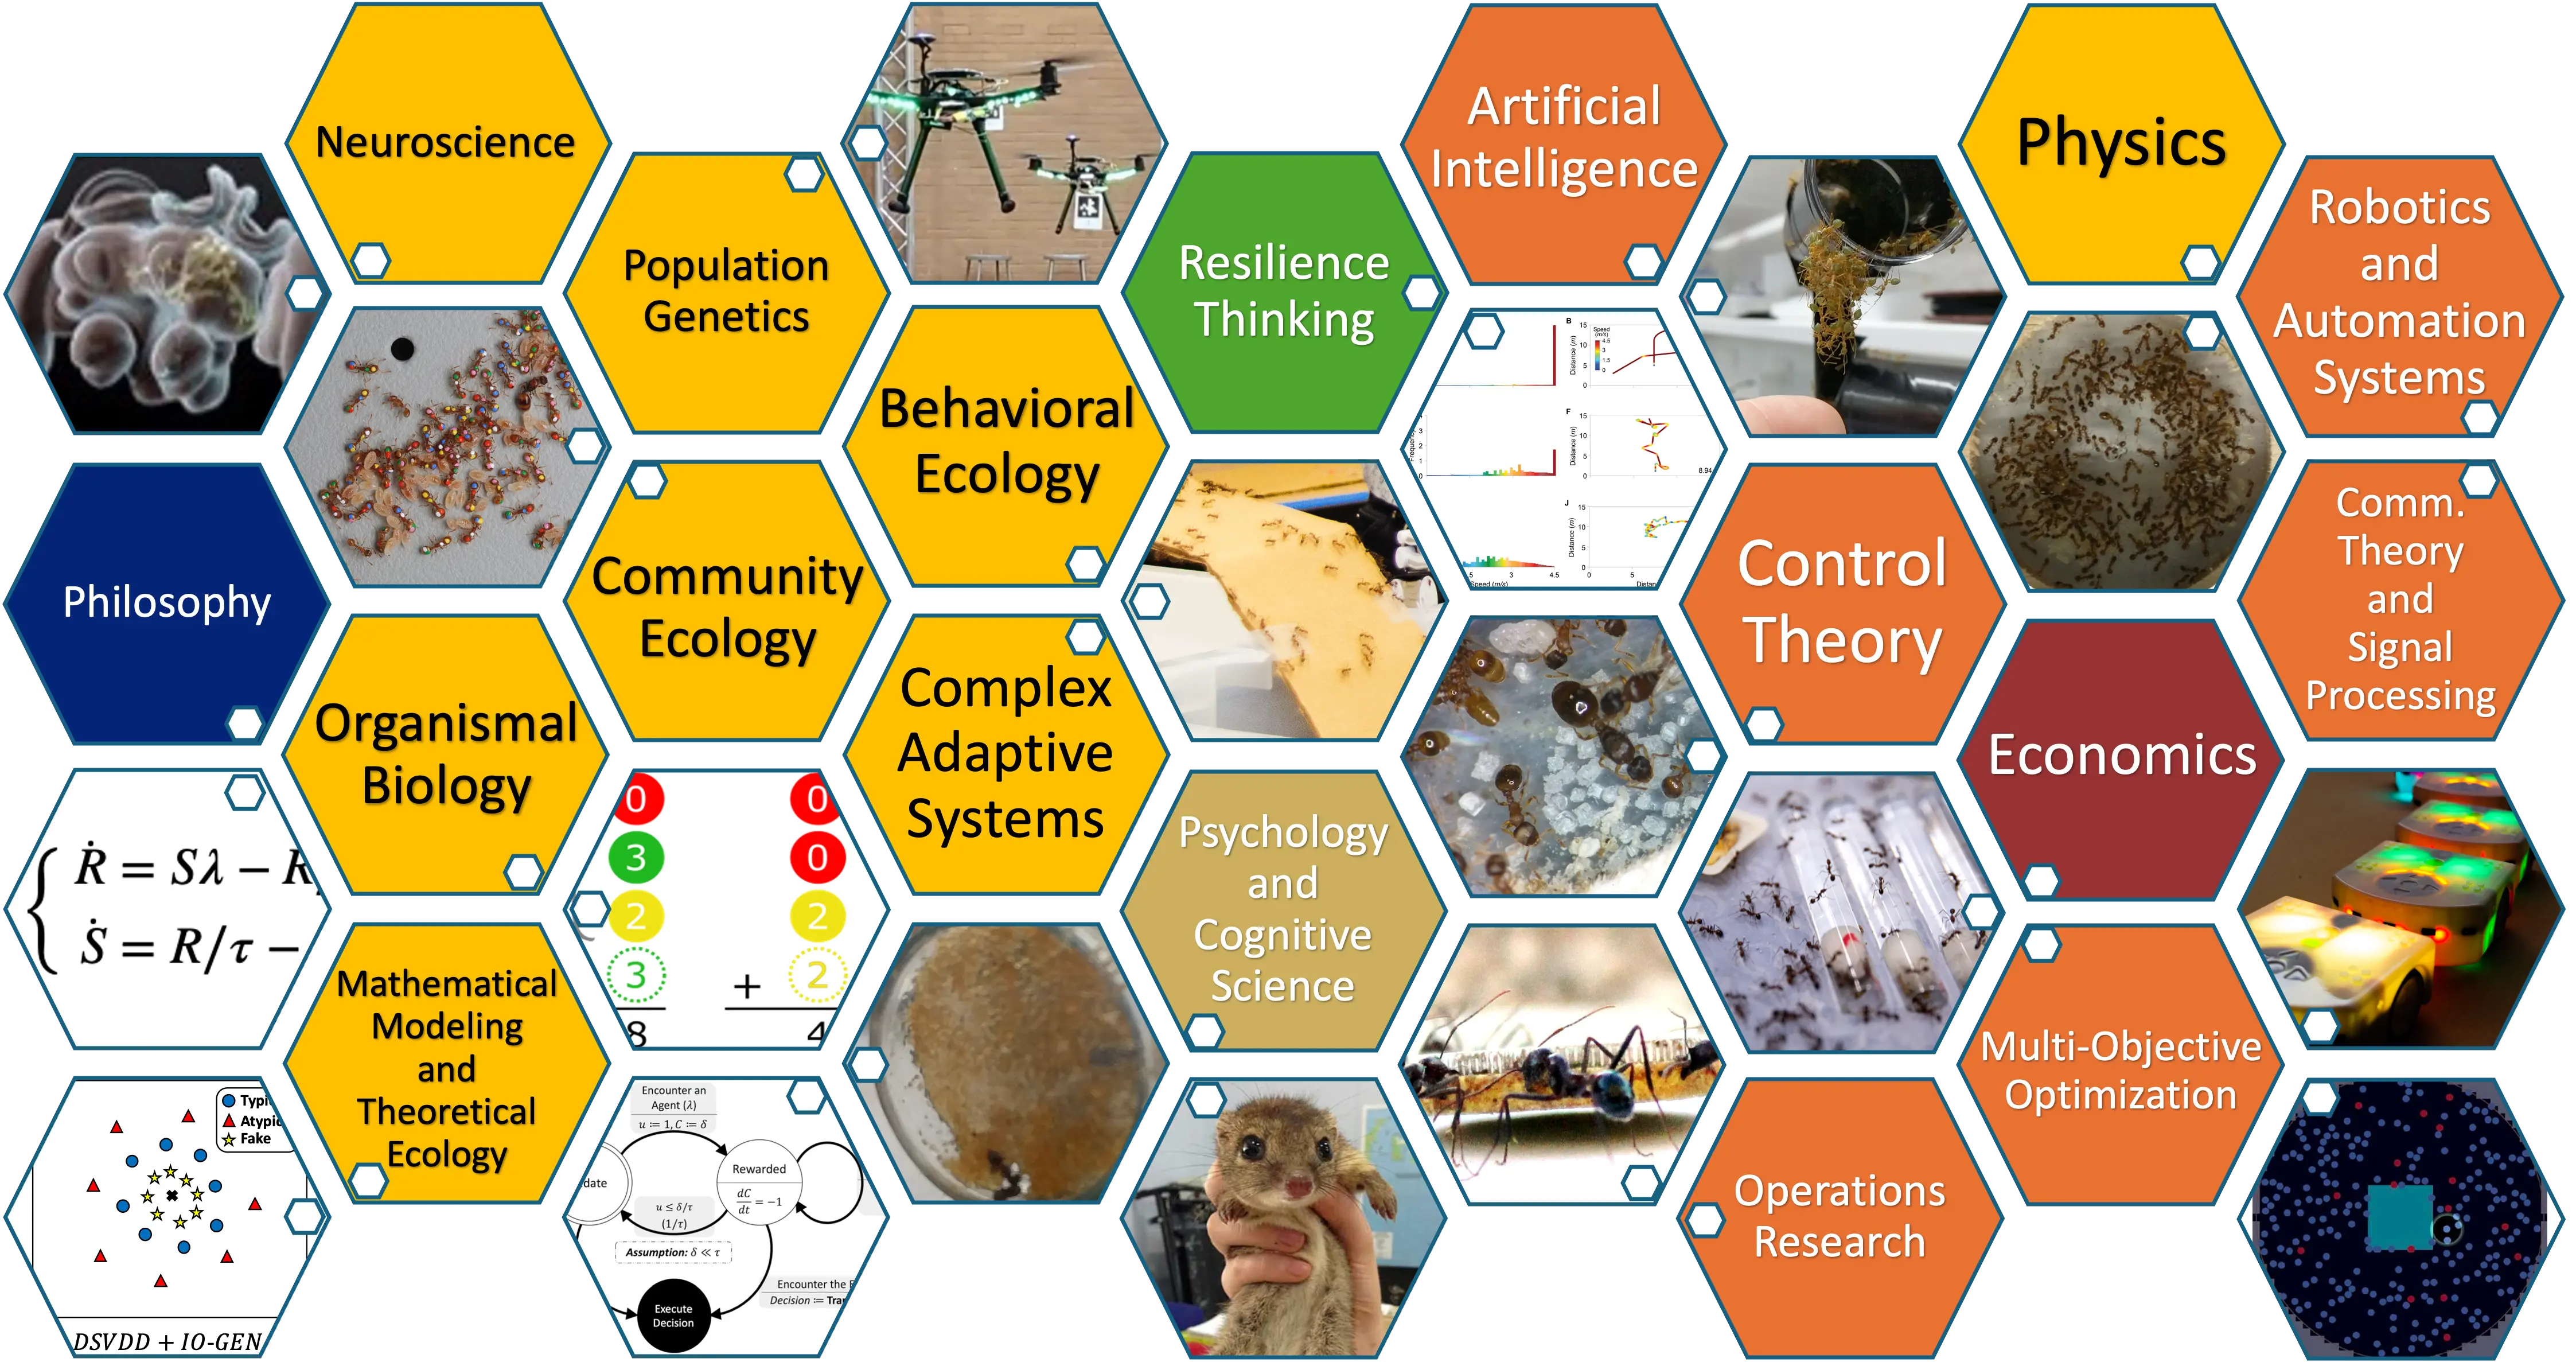 Honeycomb-style grid with multi-colored cells that each either have a discipline represented in the lab or an image related to lab projects. Disciplines reflected include Control Theory, Robotics and Automation Systems, Economics, Behavioral Ecology, Organismal Biology, Mathematical Modeling and Theoretical Ecology, Resilience Thinking, and many more.